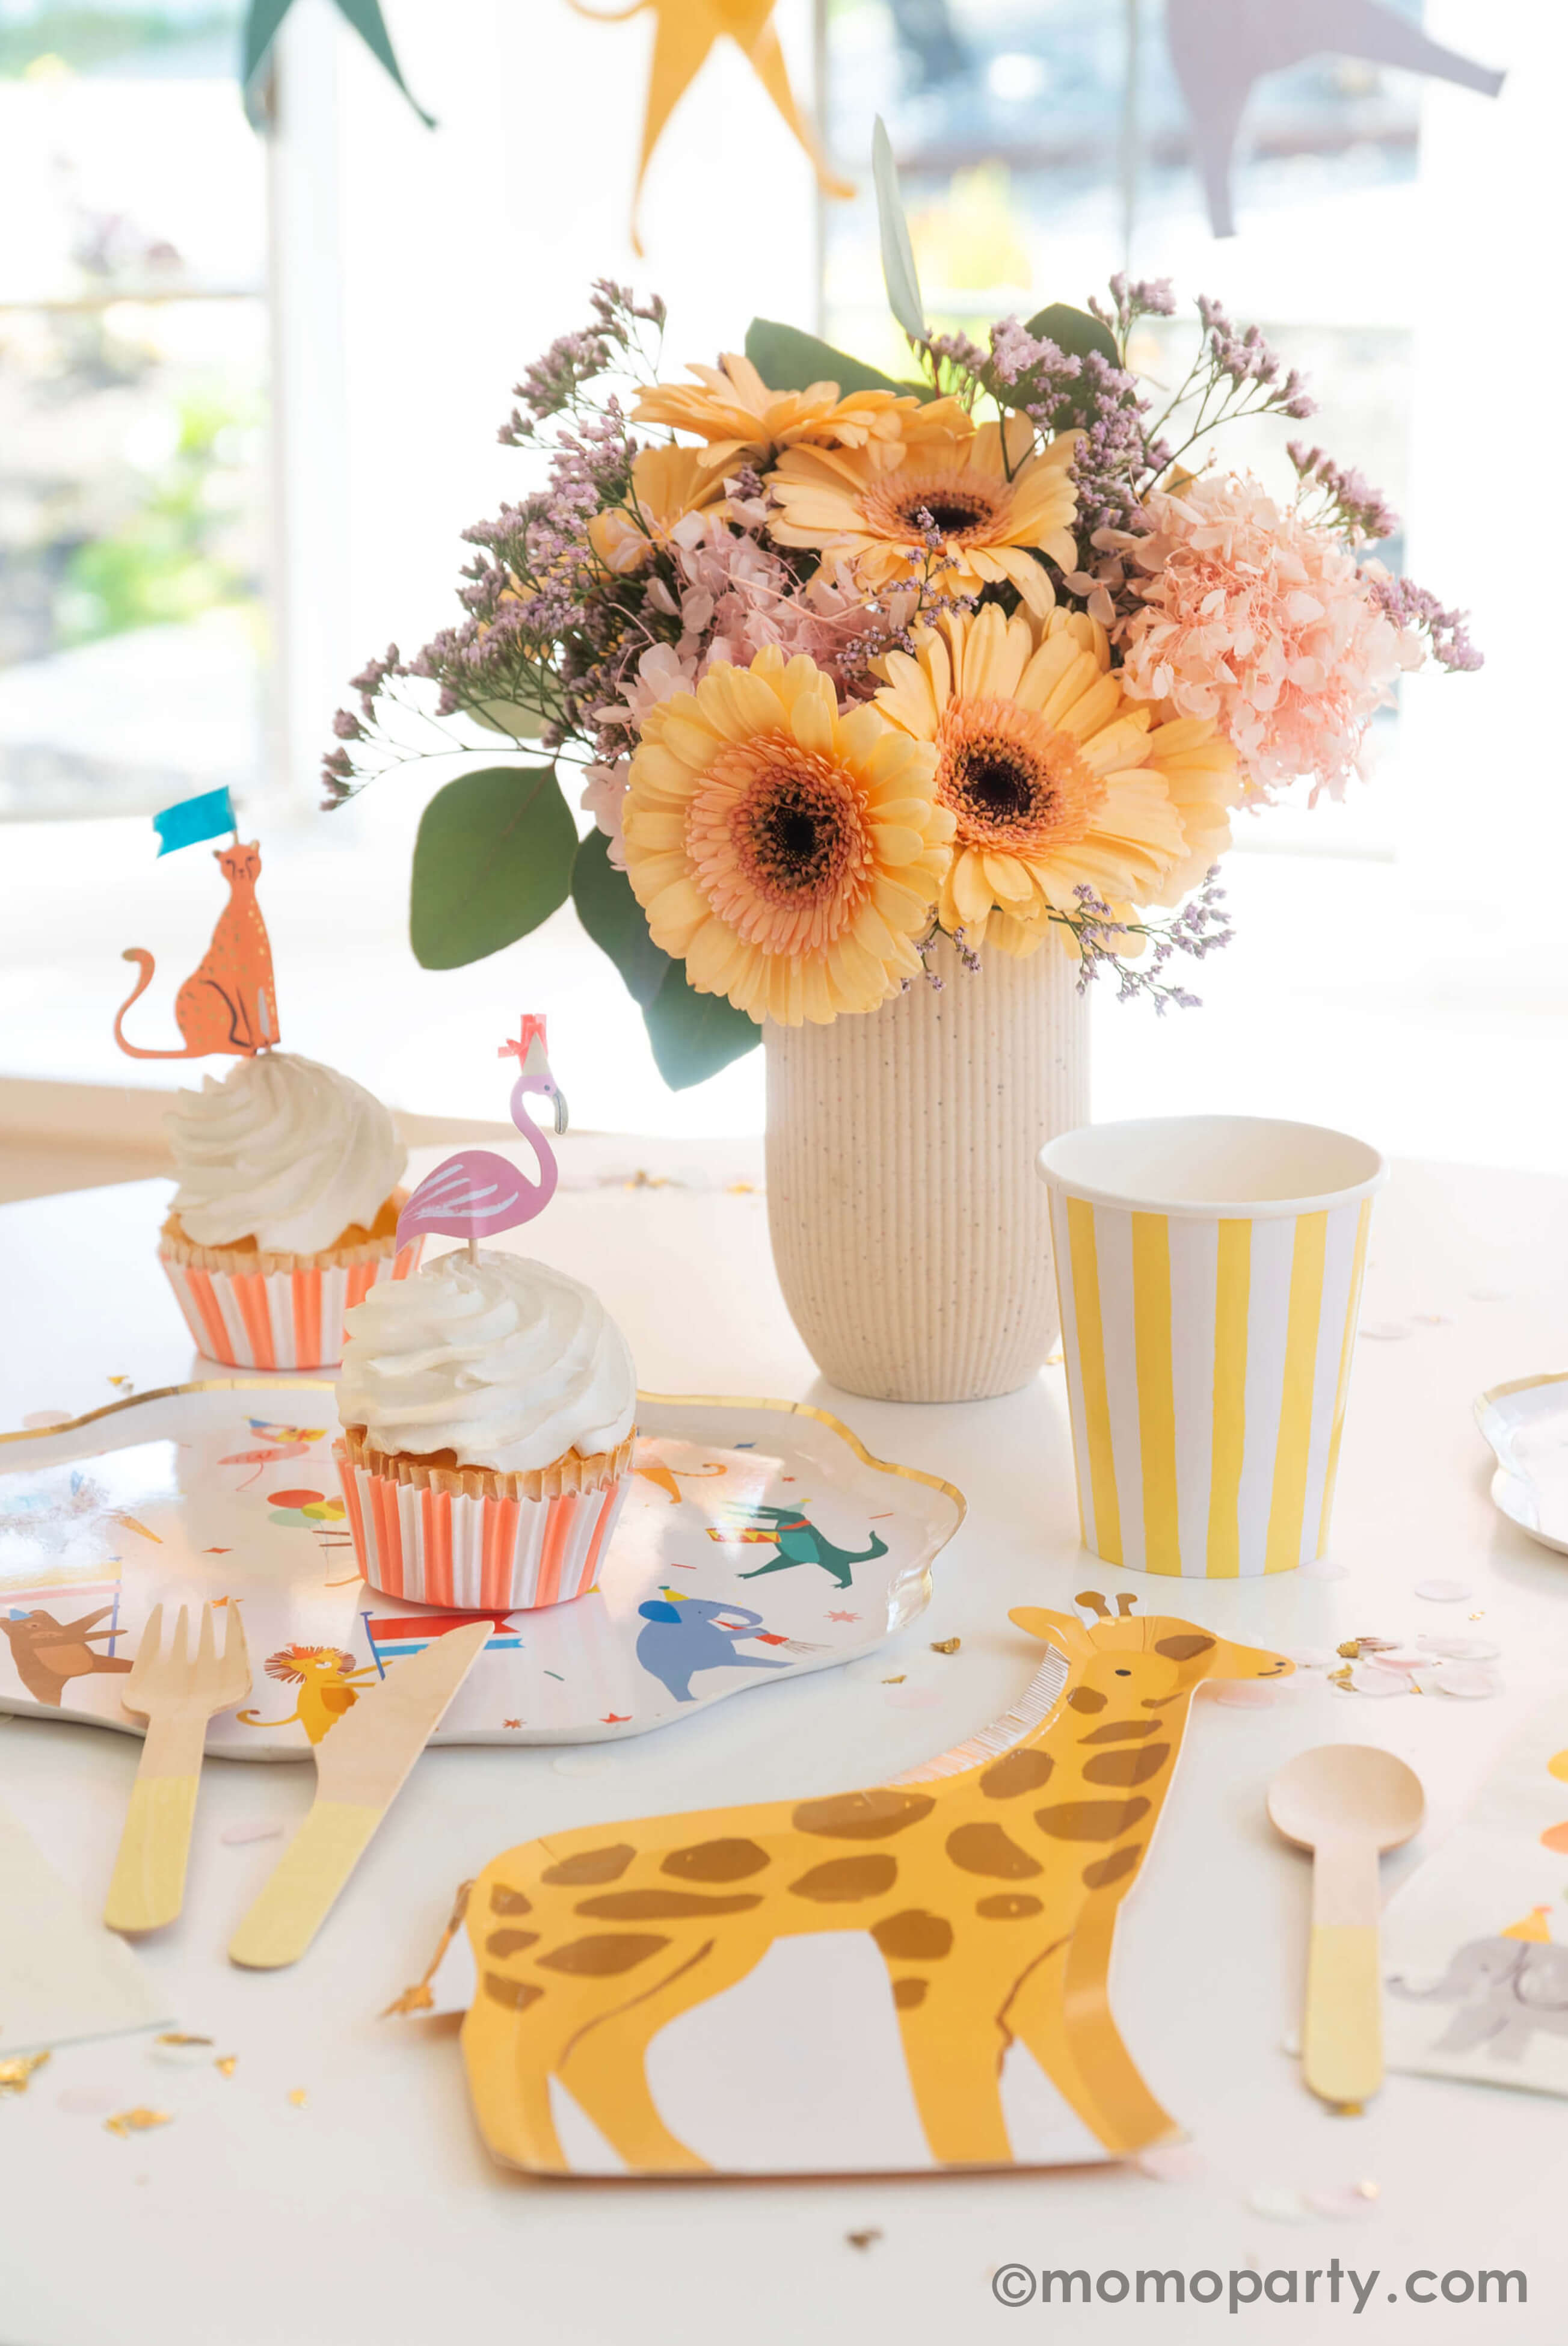 A kid's animal themed party table featuring Momo Party's Animal Parade Dinner plate, a giraffe shaped plate, cupcakes with adorable safari animal cupcake toppers by Meri Meri, Rifle Paper Co's party animal guest napkins flowers in a white vase, along with light yellow striped cups and yellow wooden utensil. There is also a Animal Parade Garland with balloons decorated behind the table. it makes a great party inspiration for kid's animal, safari, carnival themed birthday party.